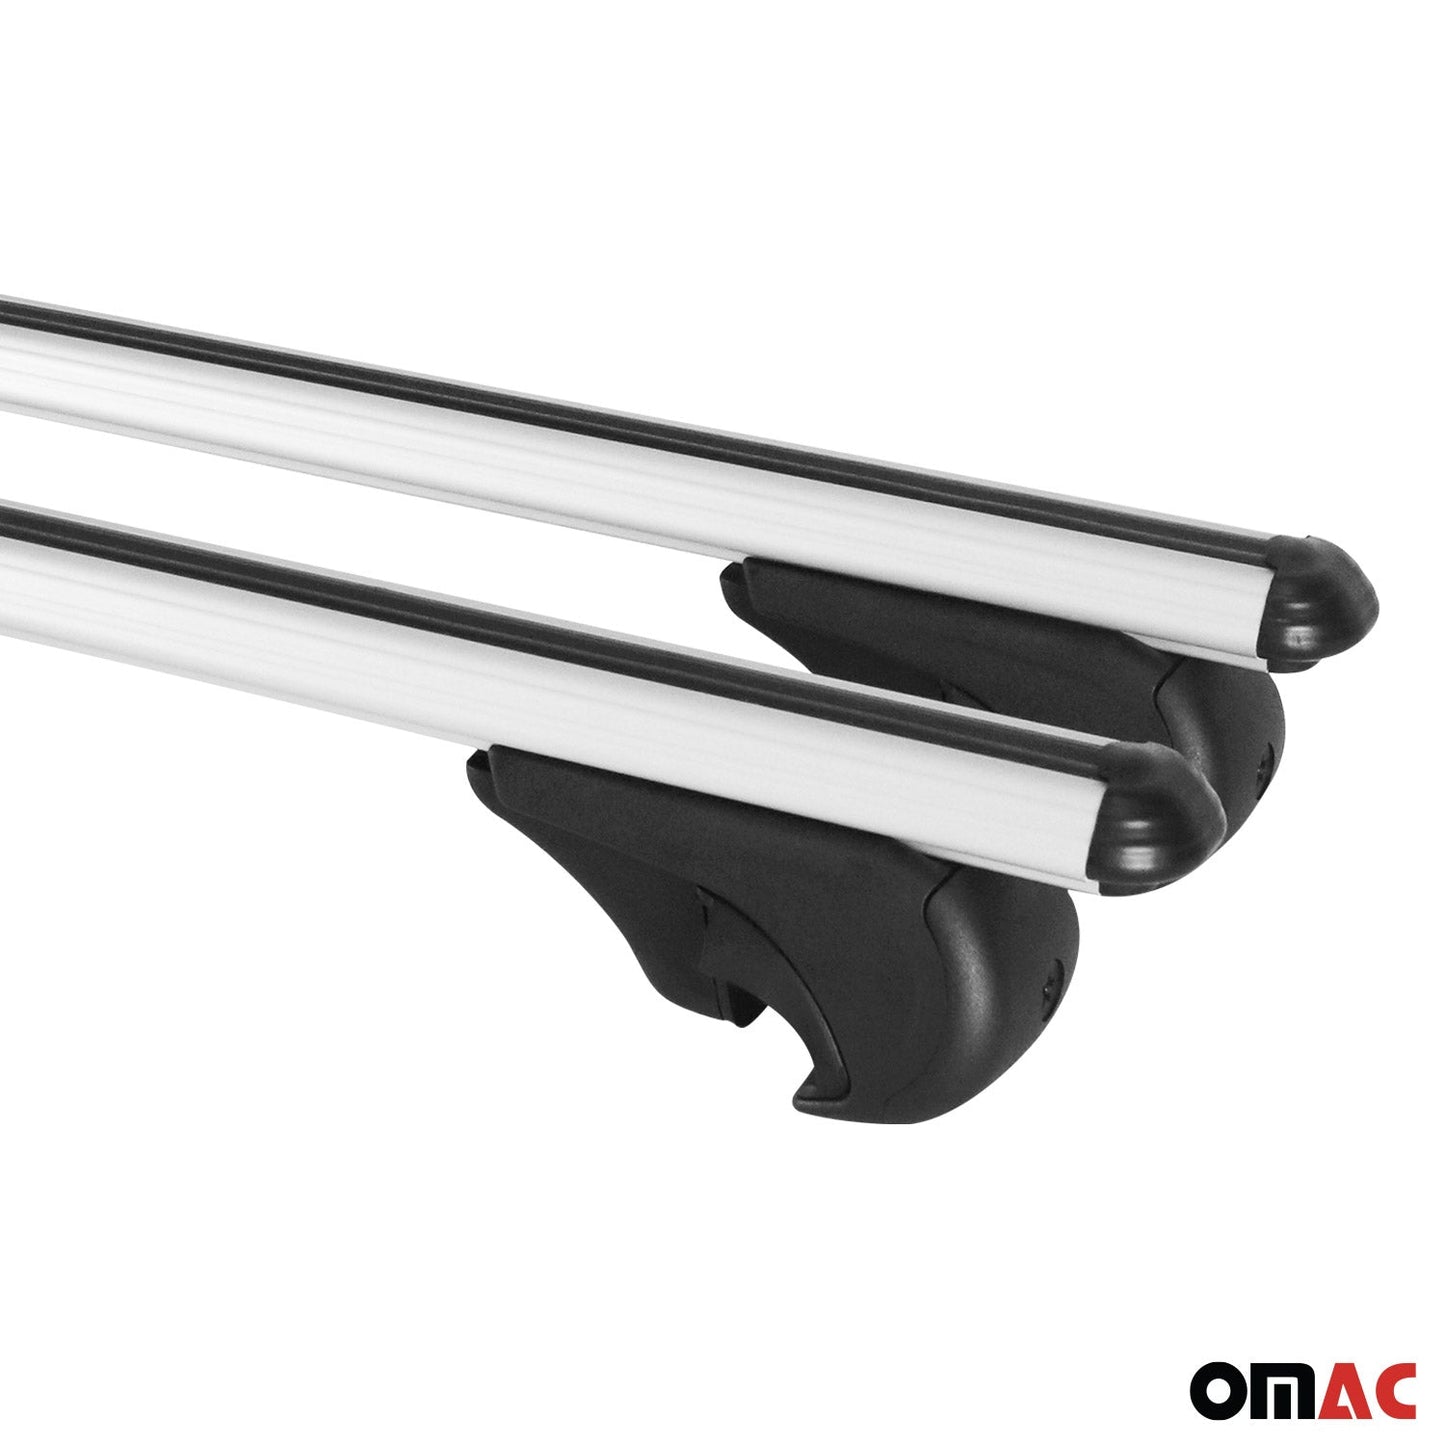 OMAC Lockable Roof Rack Cross Bars Luggage Carrier for Audi A4 Allroad 2006-2016 Gray 11049696929L